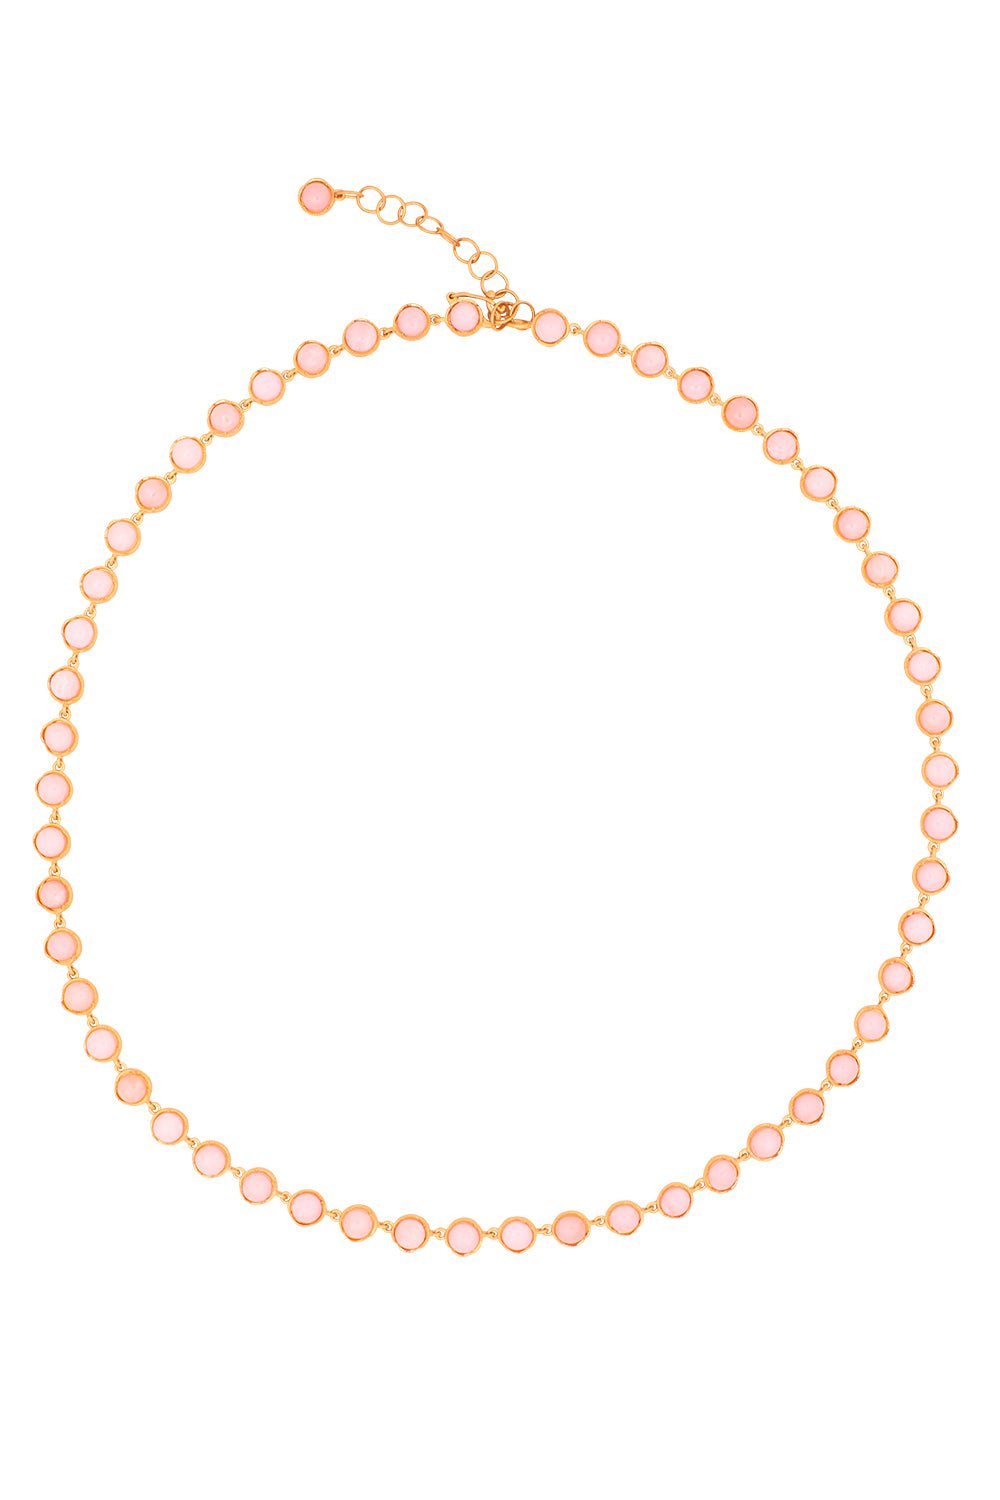 IRENE NEUWIRTH JEWELRY-Small Classic Link Pink Opal Necklace-ROSE GOLD